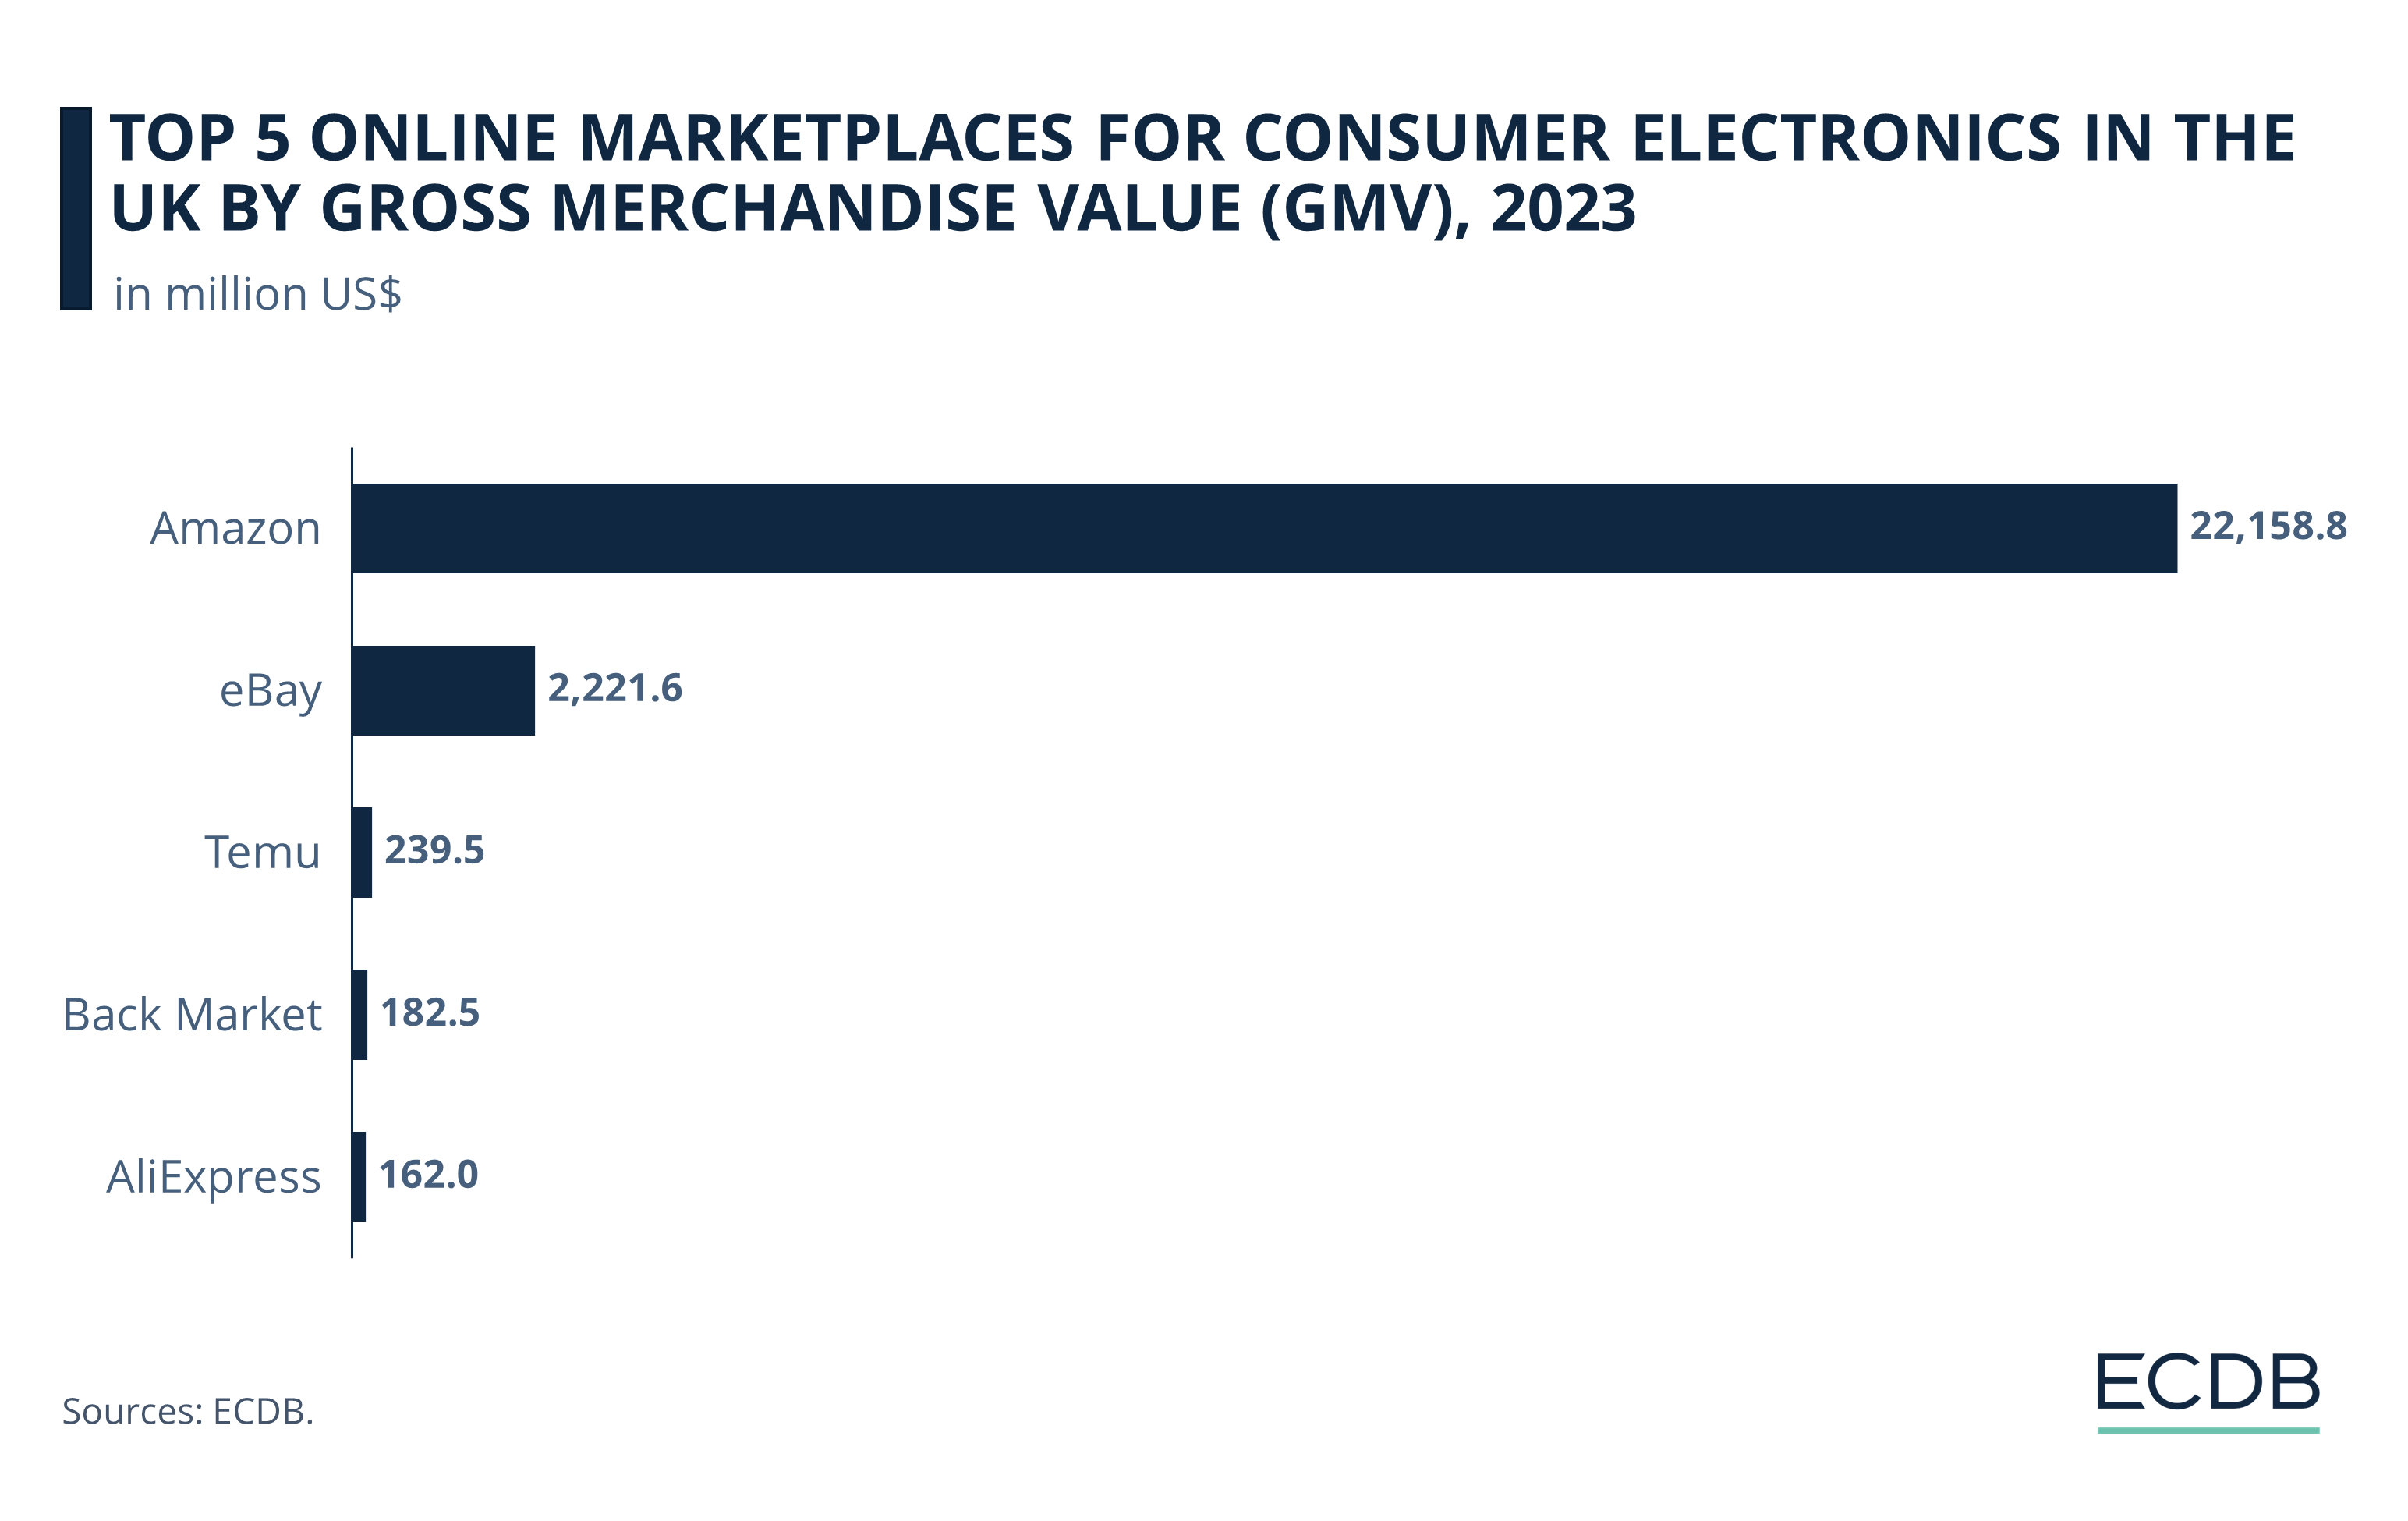 Top 5 Online Marketplaces for Consumer Electronics in the UK by Gross Merchandise Value (GMV), 2022